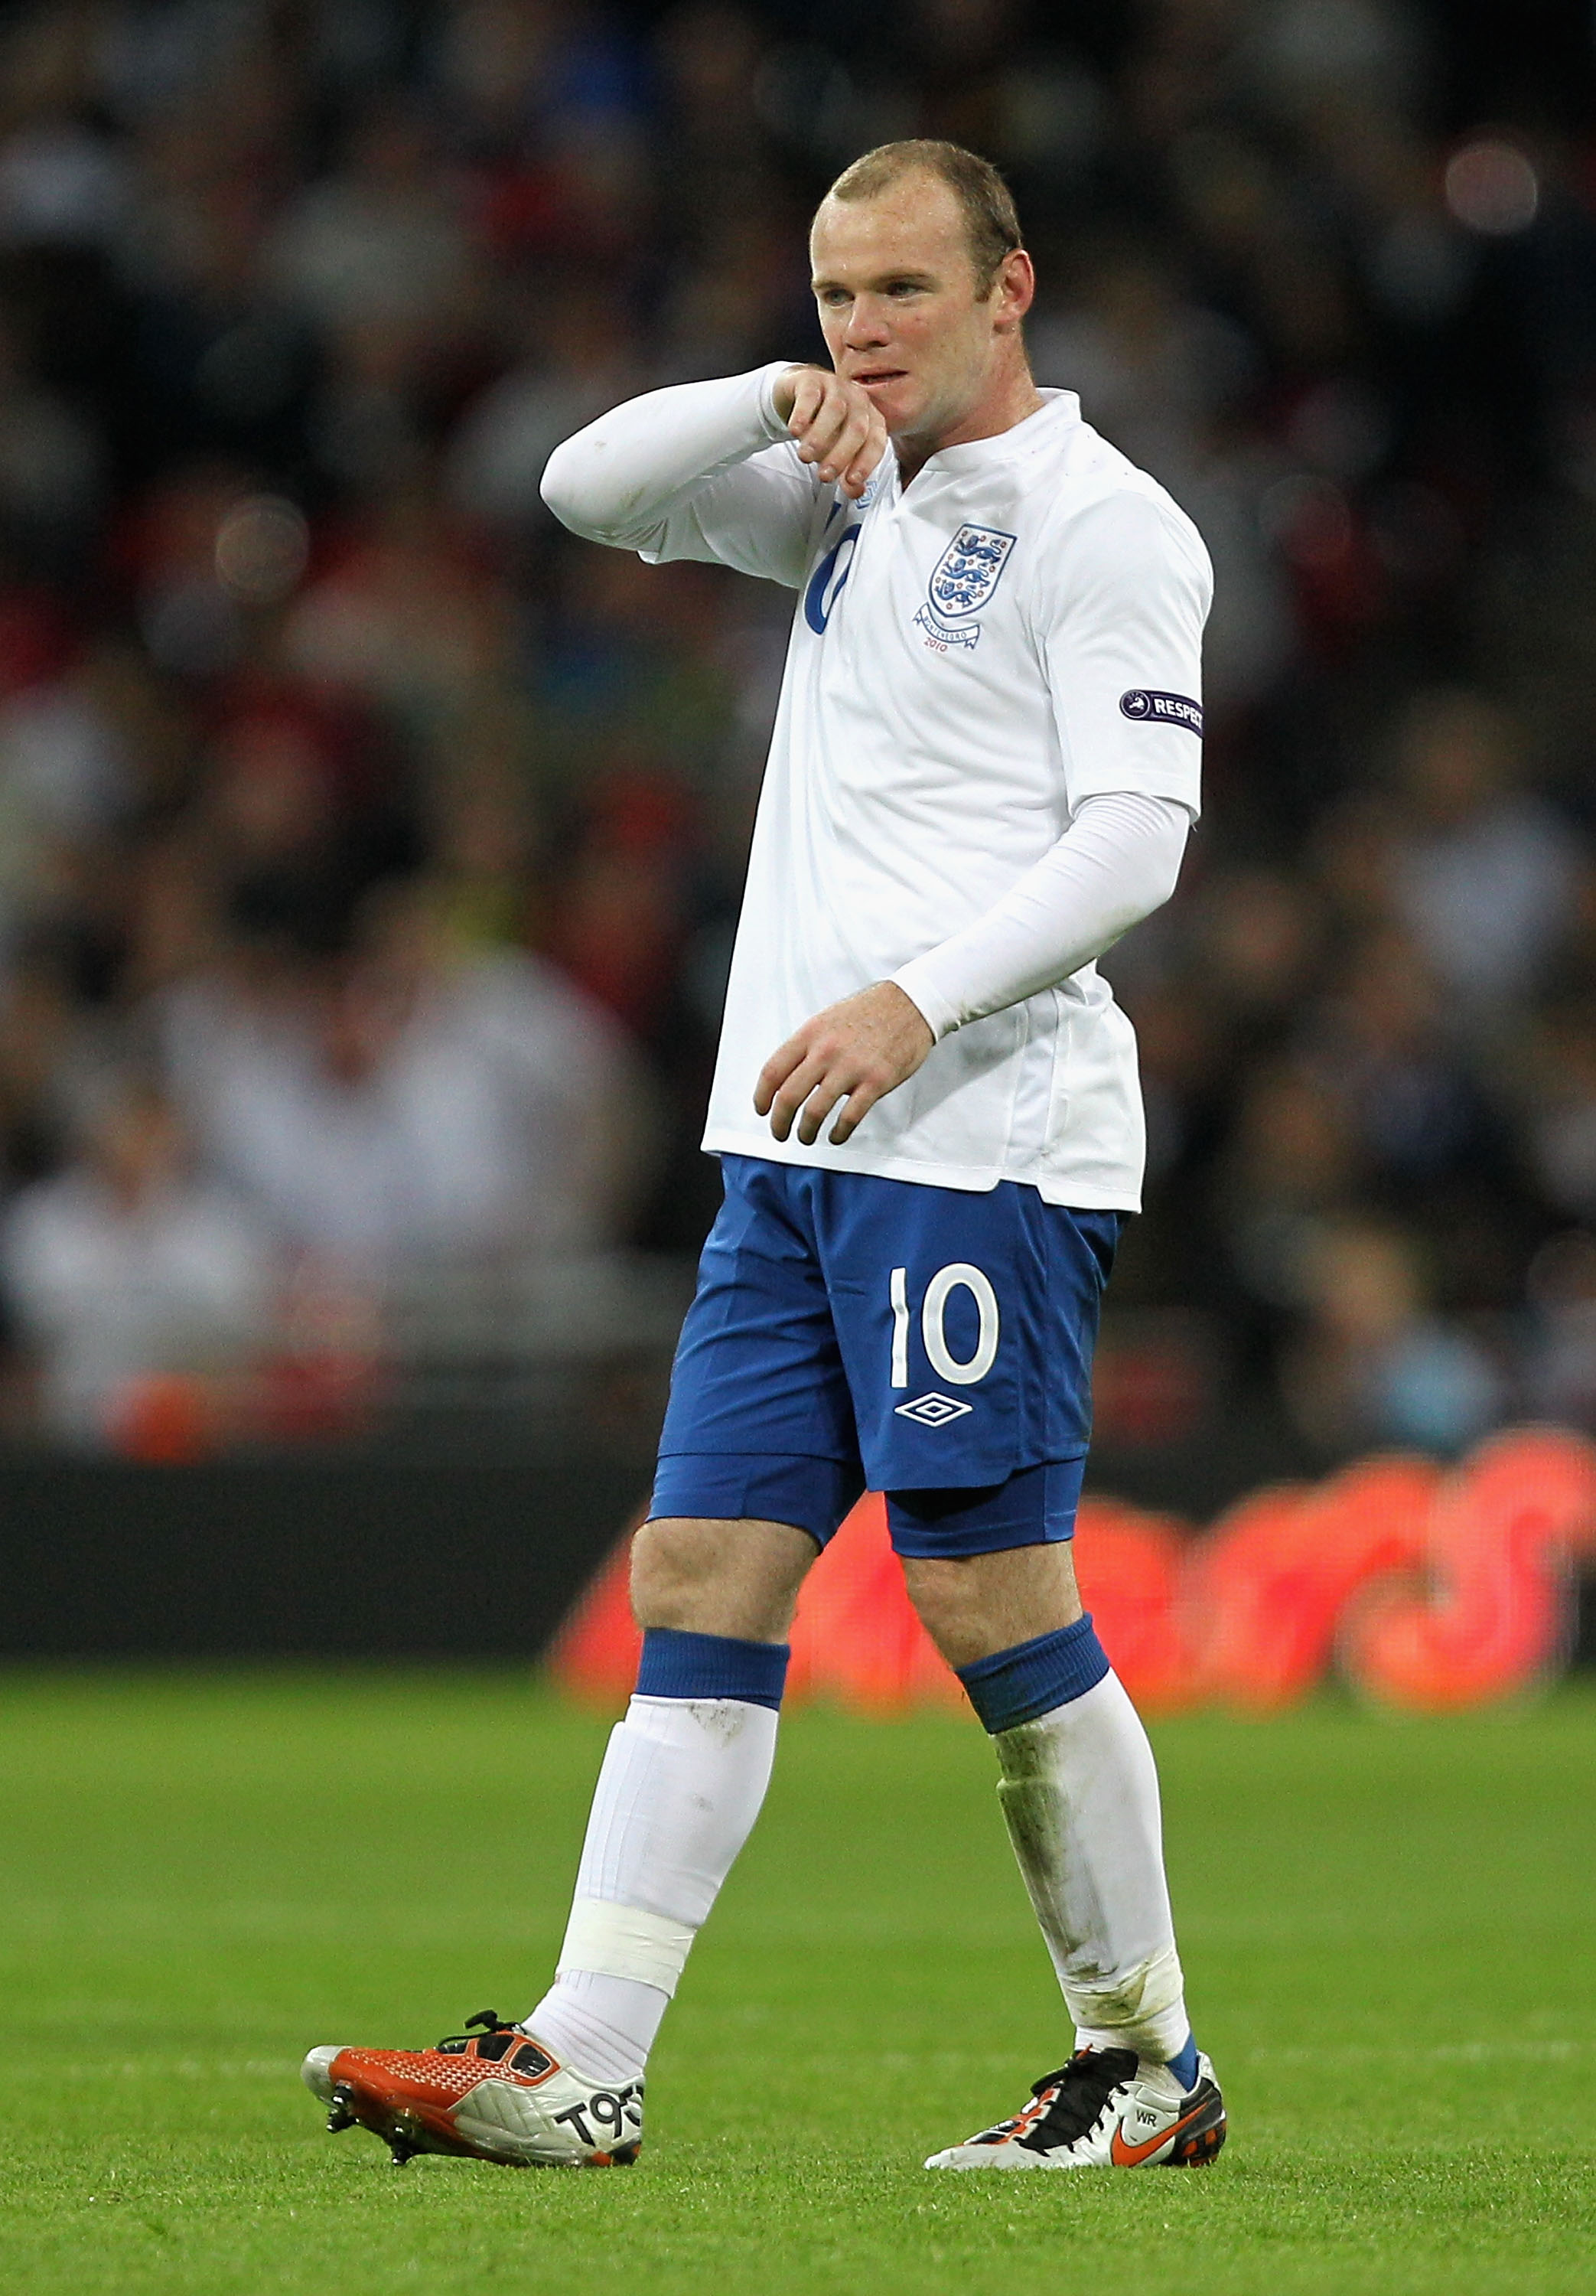 LONDON, ENGLAND - OCTOBER 12:  Wayne Rooney of England shows his frustration during the UEFA EURO 2012 Group G Qualifying match between England and Montenegro at Wembley Stadium on October 12, 2010 in London, England.  (Photo by Hamish Blair/Getty Images)